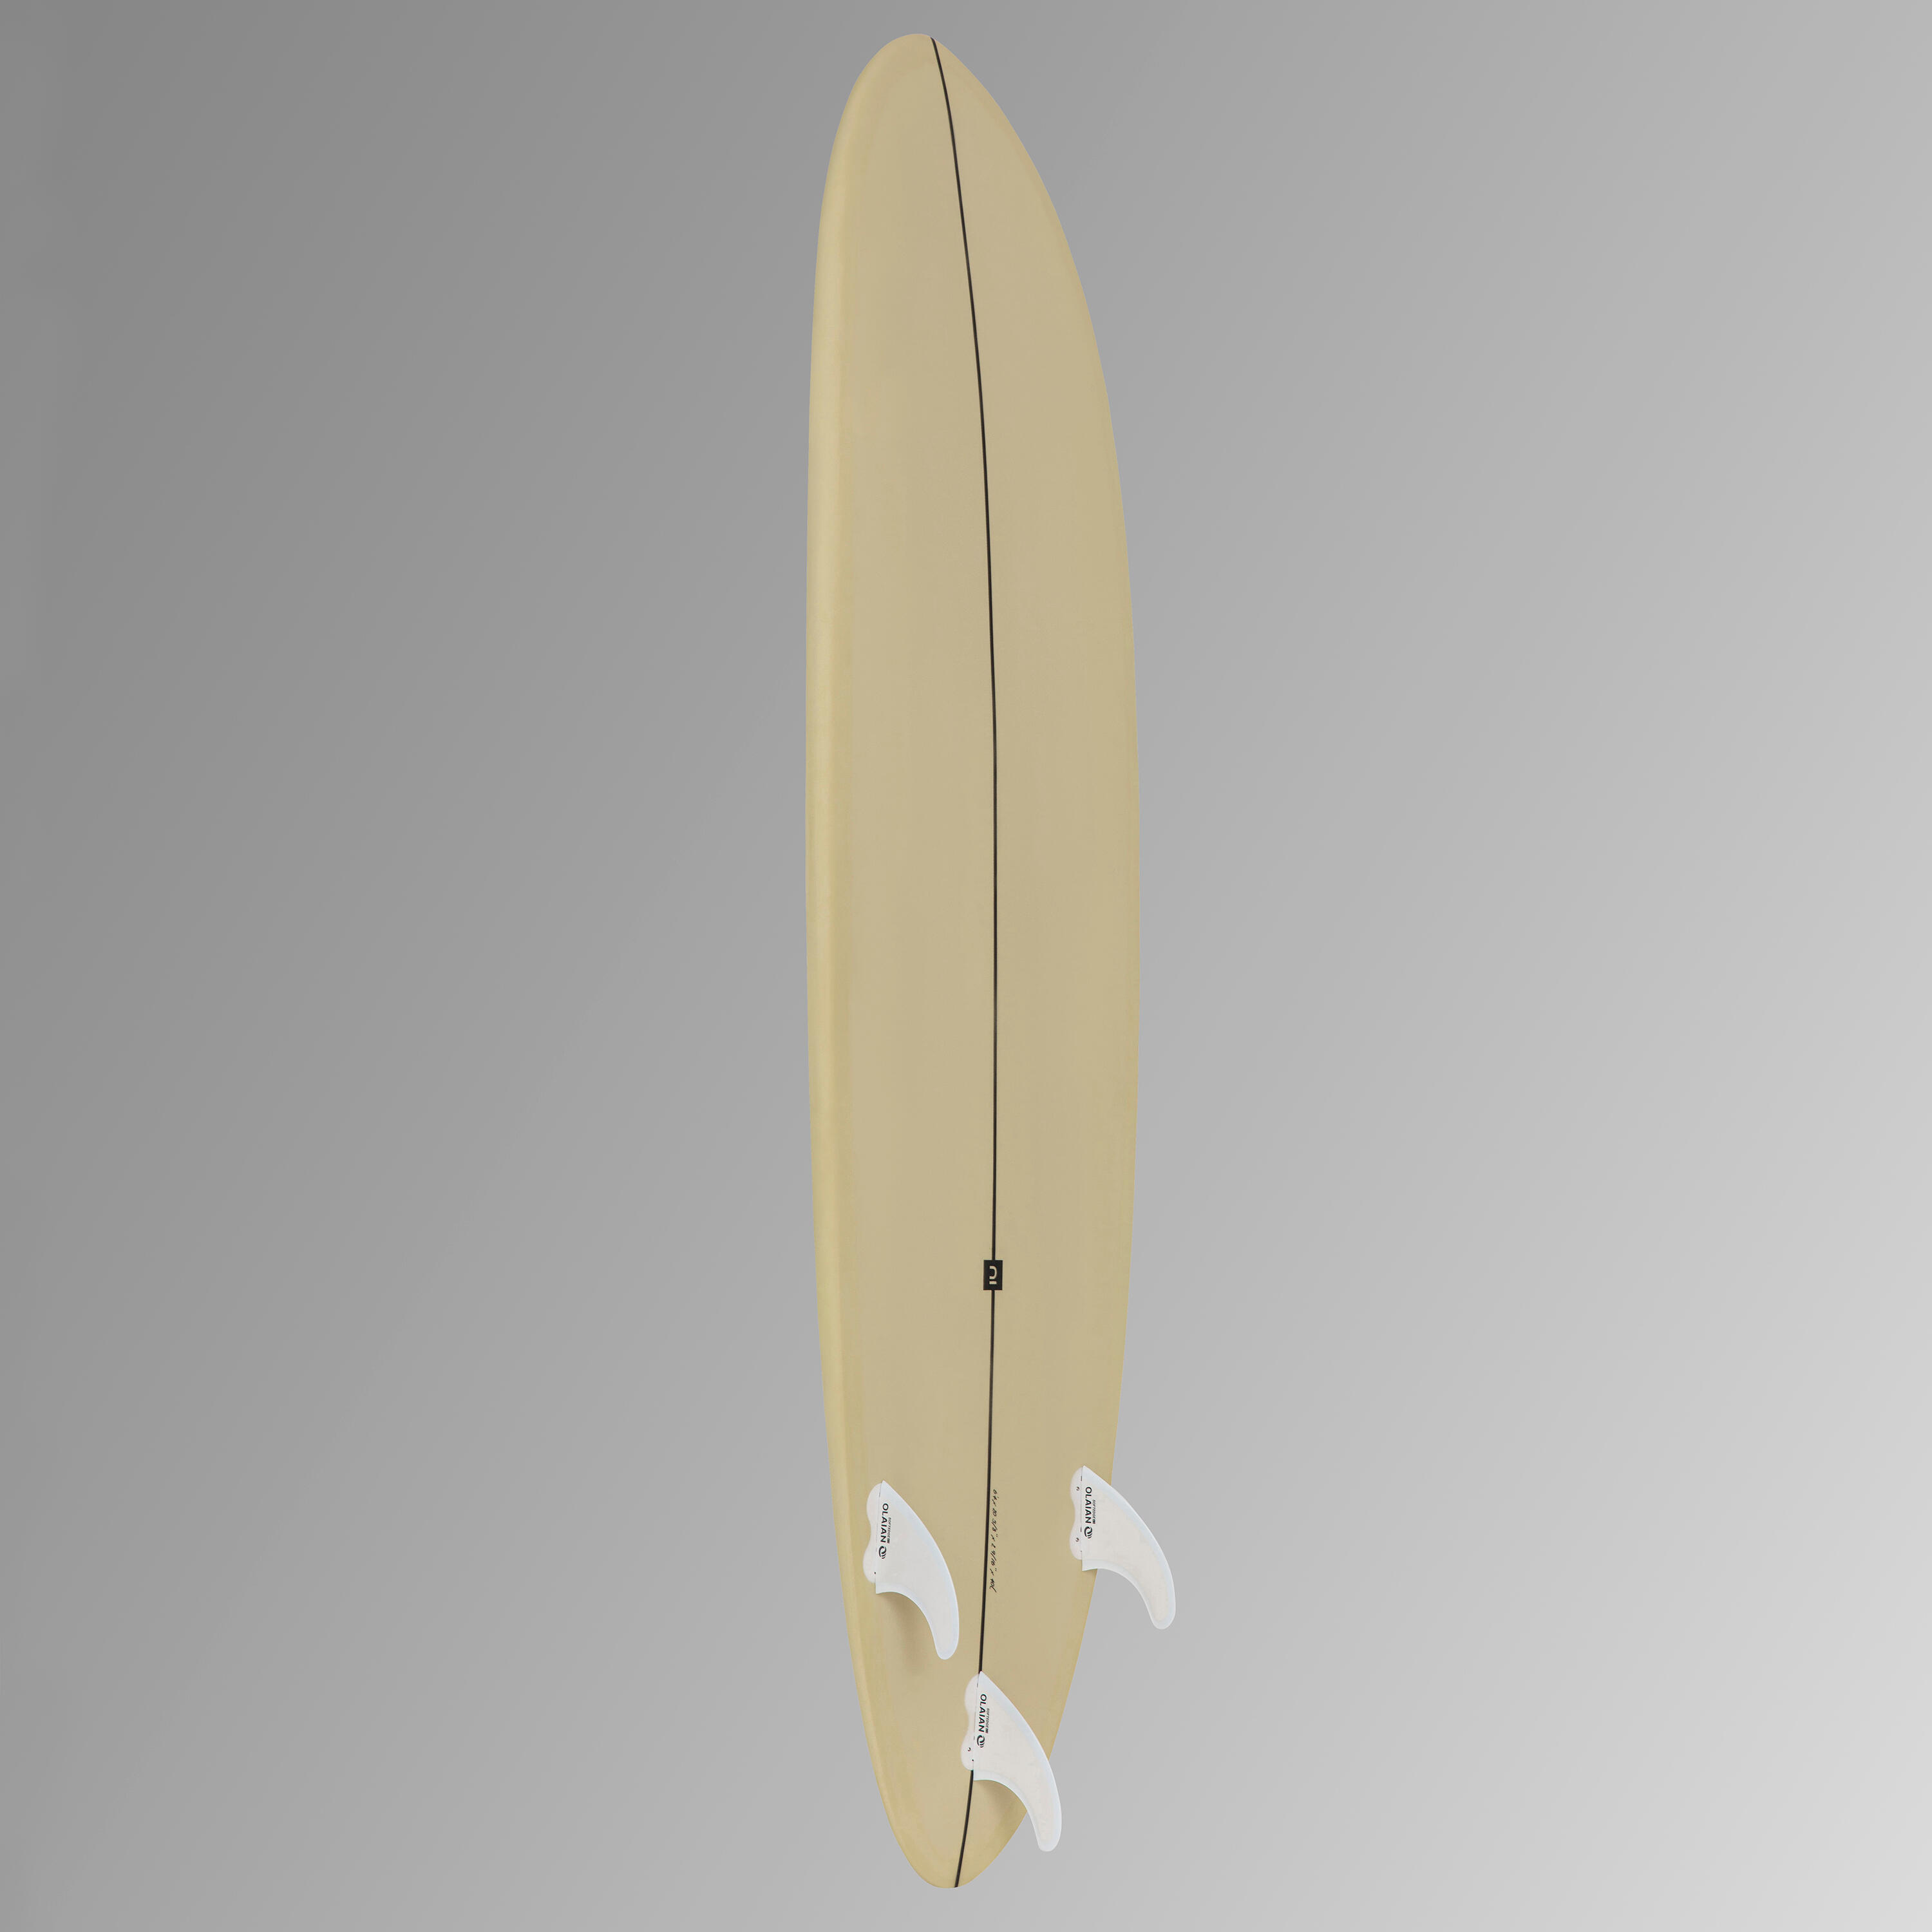 SURF 500 Hybrid 6'4", complete with 3 fins. 8/14